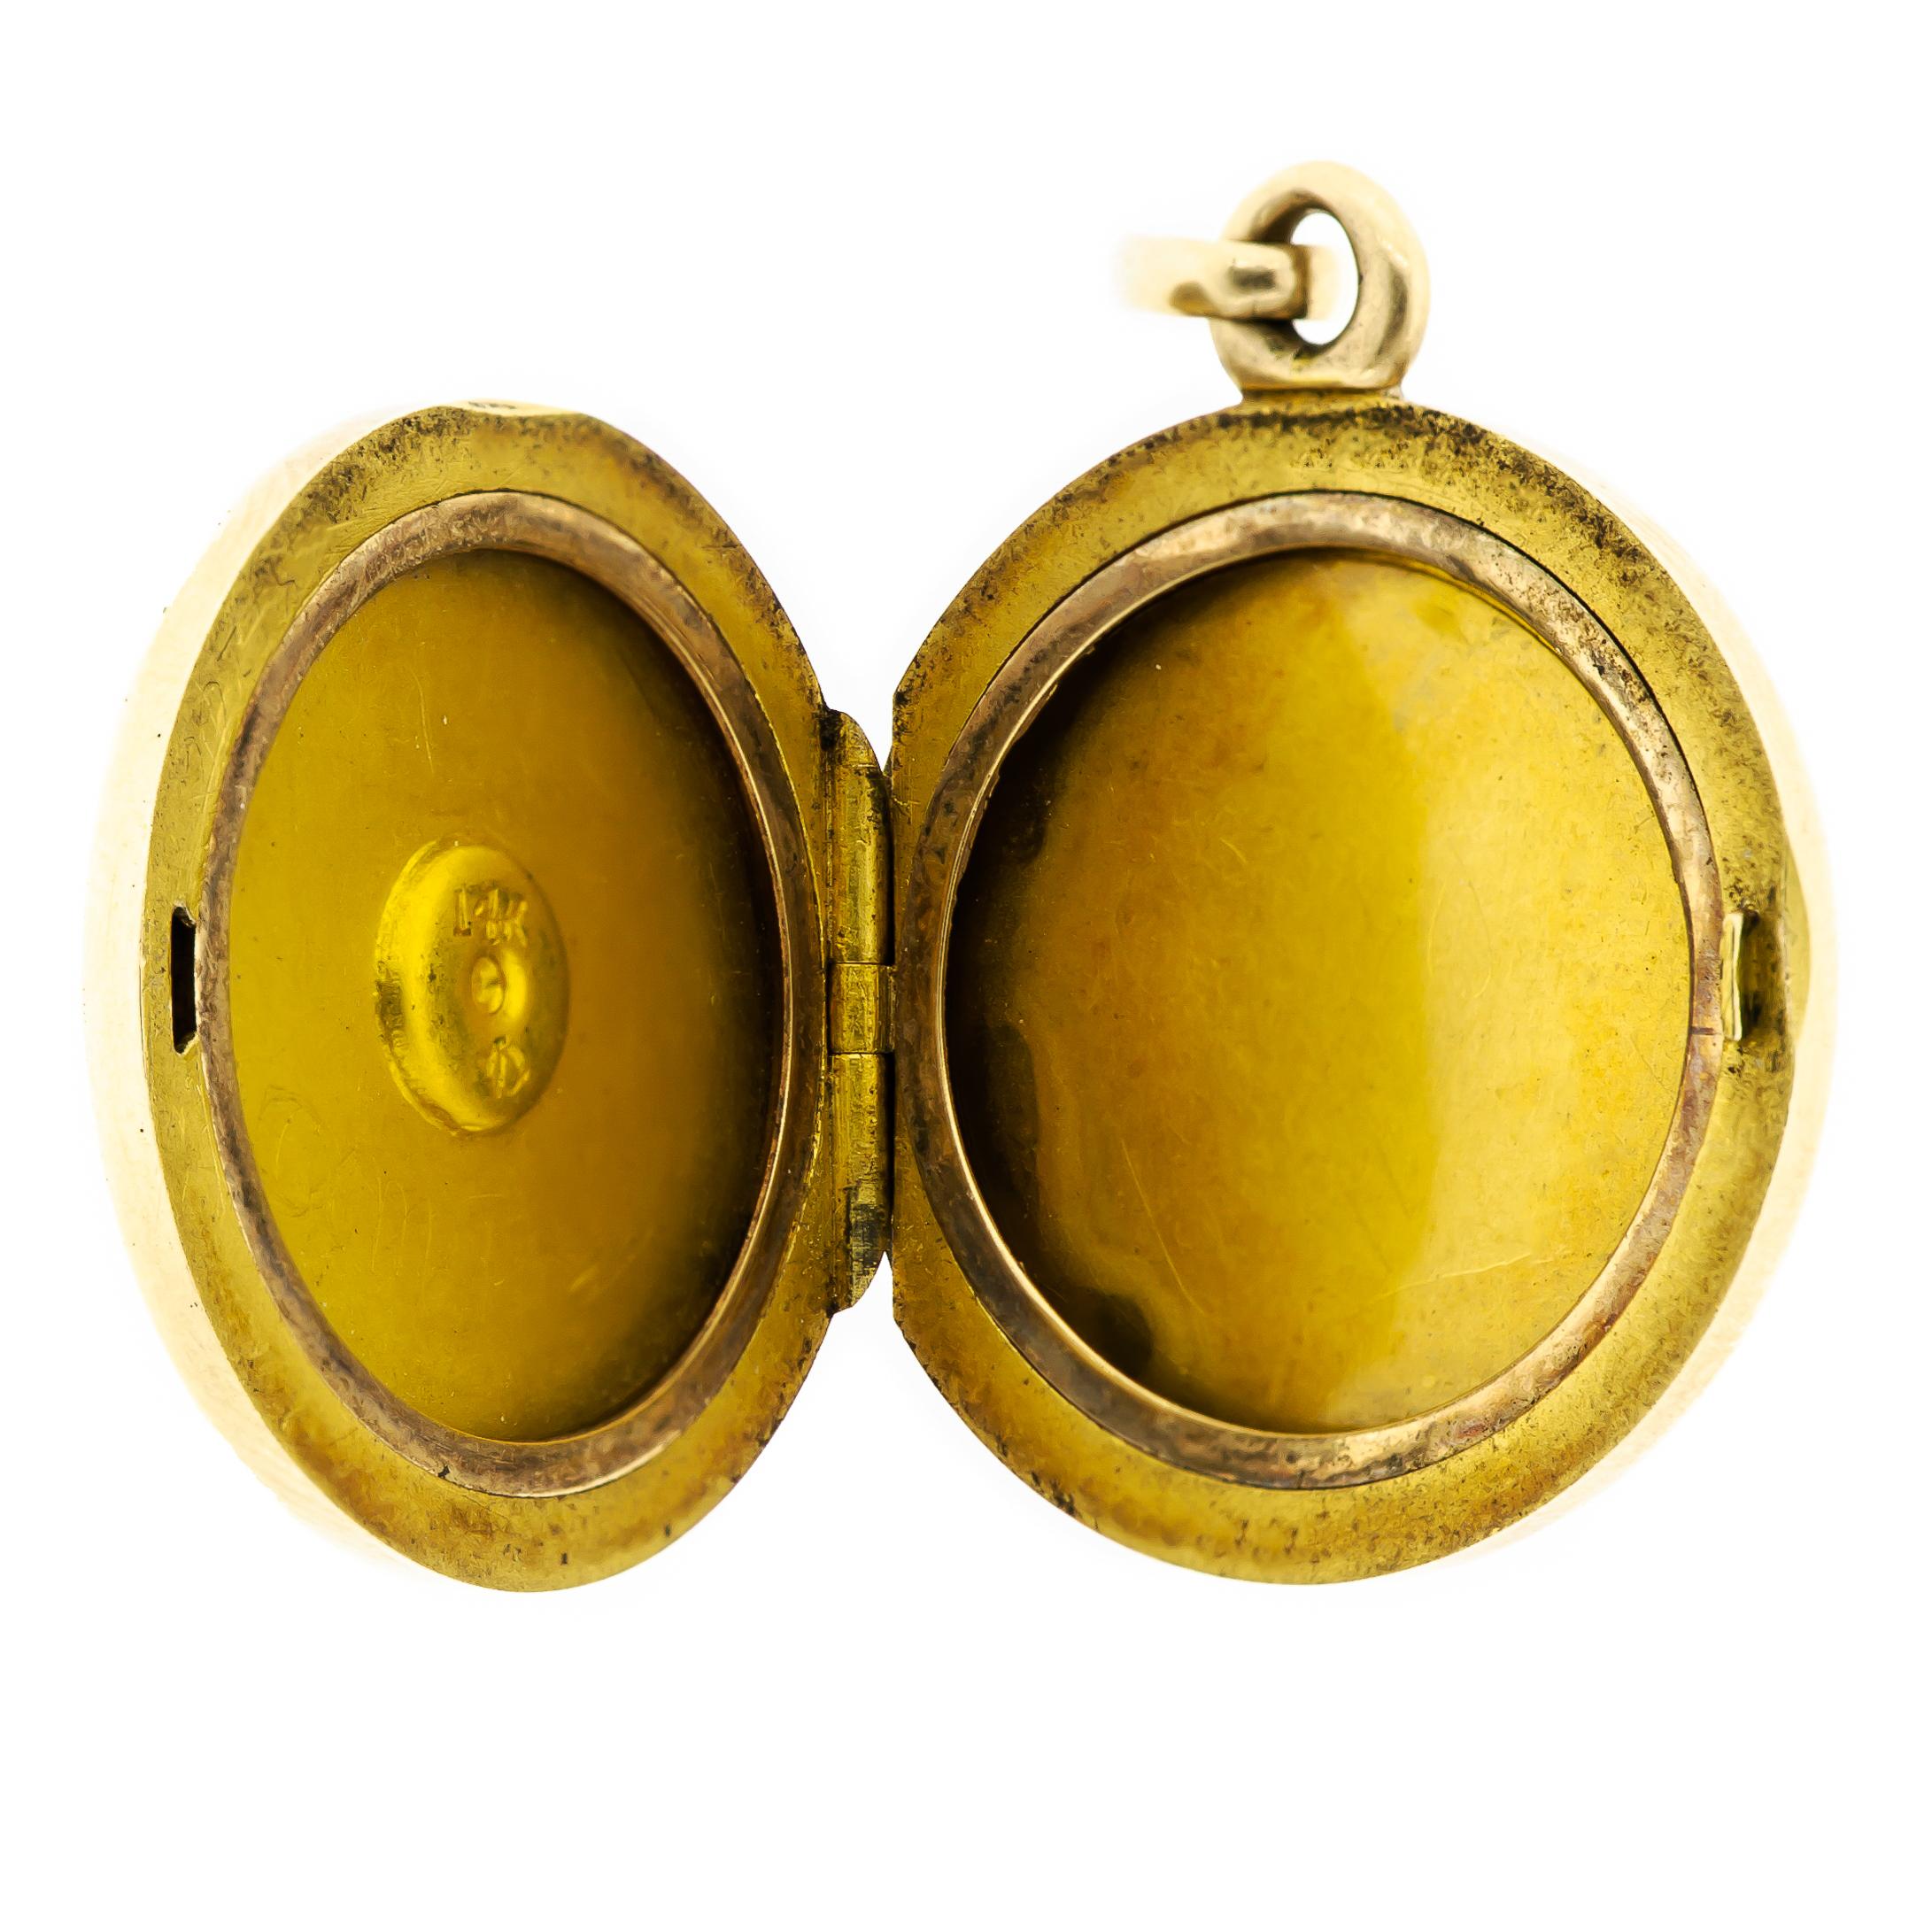 Lovely circa 1900 round antique locket handcrafted in 14kt yellow gold. Interesting swirl design is depicted on both sides of the locket. Both of the inside frames are intact. This is a sturdy little piece that is extremely striking for its size.